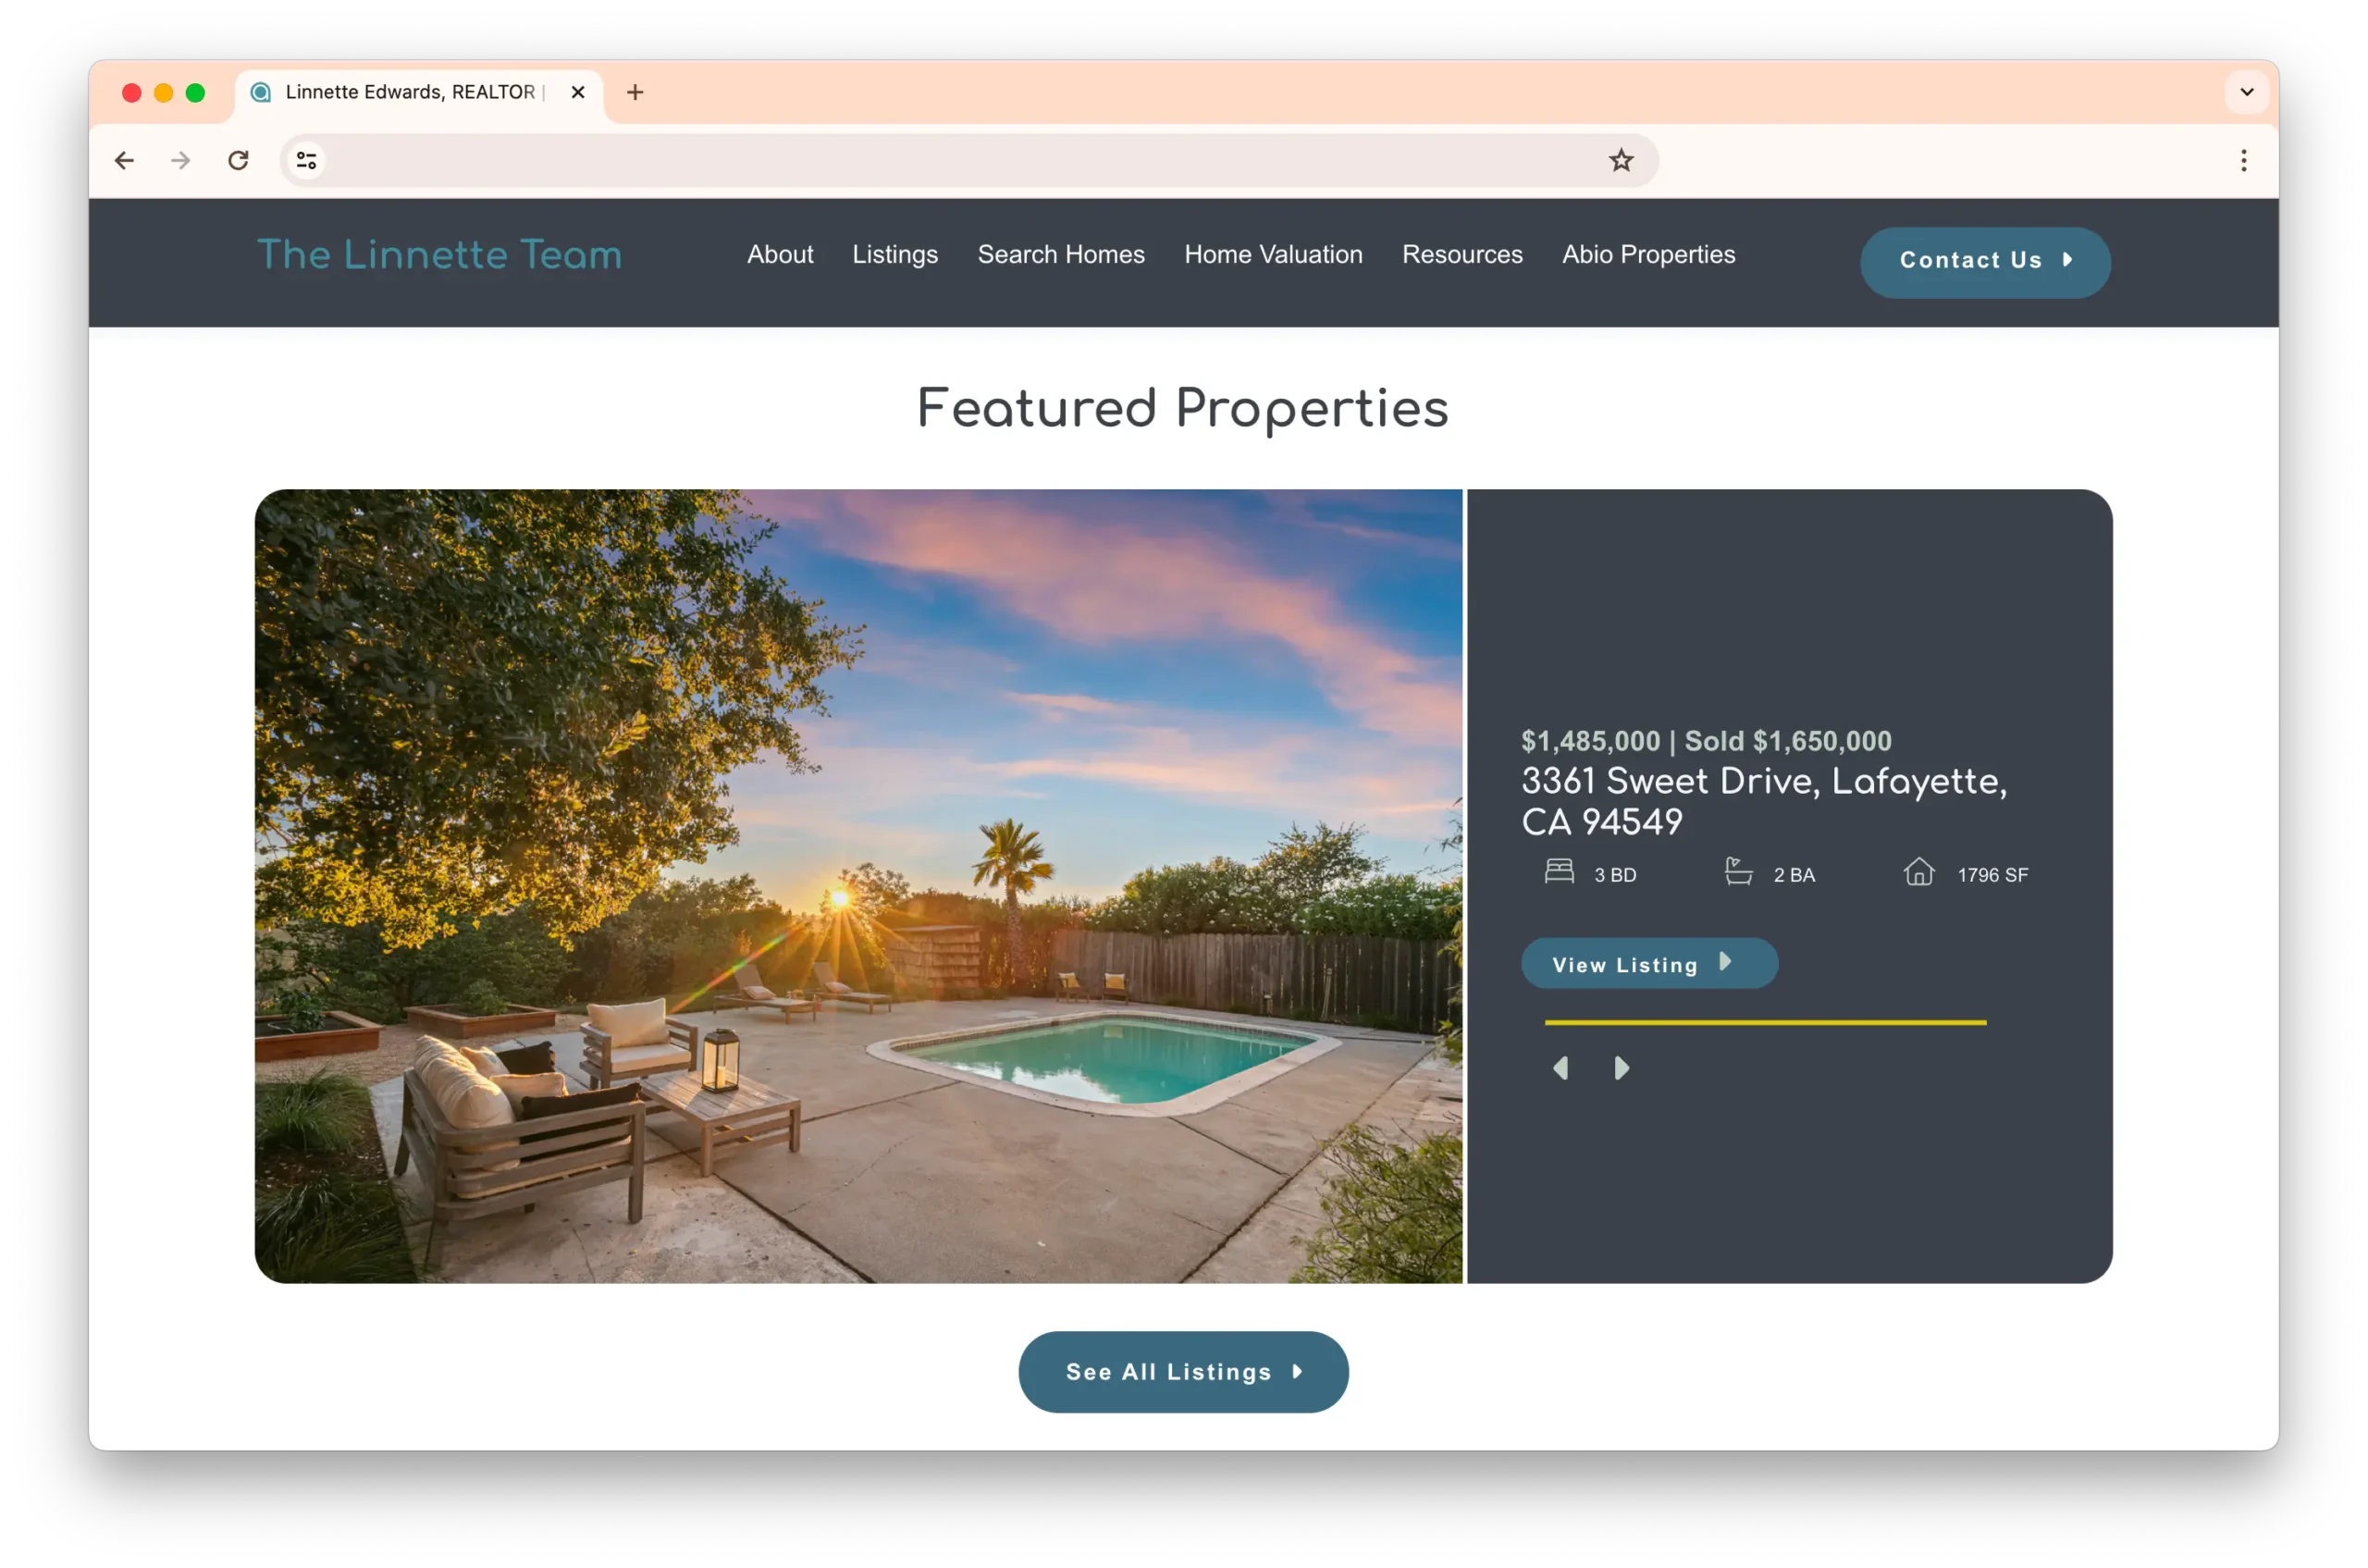 A webpage for The Linnette Team featuring a listed property at 3361 Sweet Drive, Lafayette, CA 94549. The image shows a backyard with a swimming pool and seating area at sunset. The listing details are provided on the right.